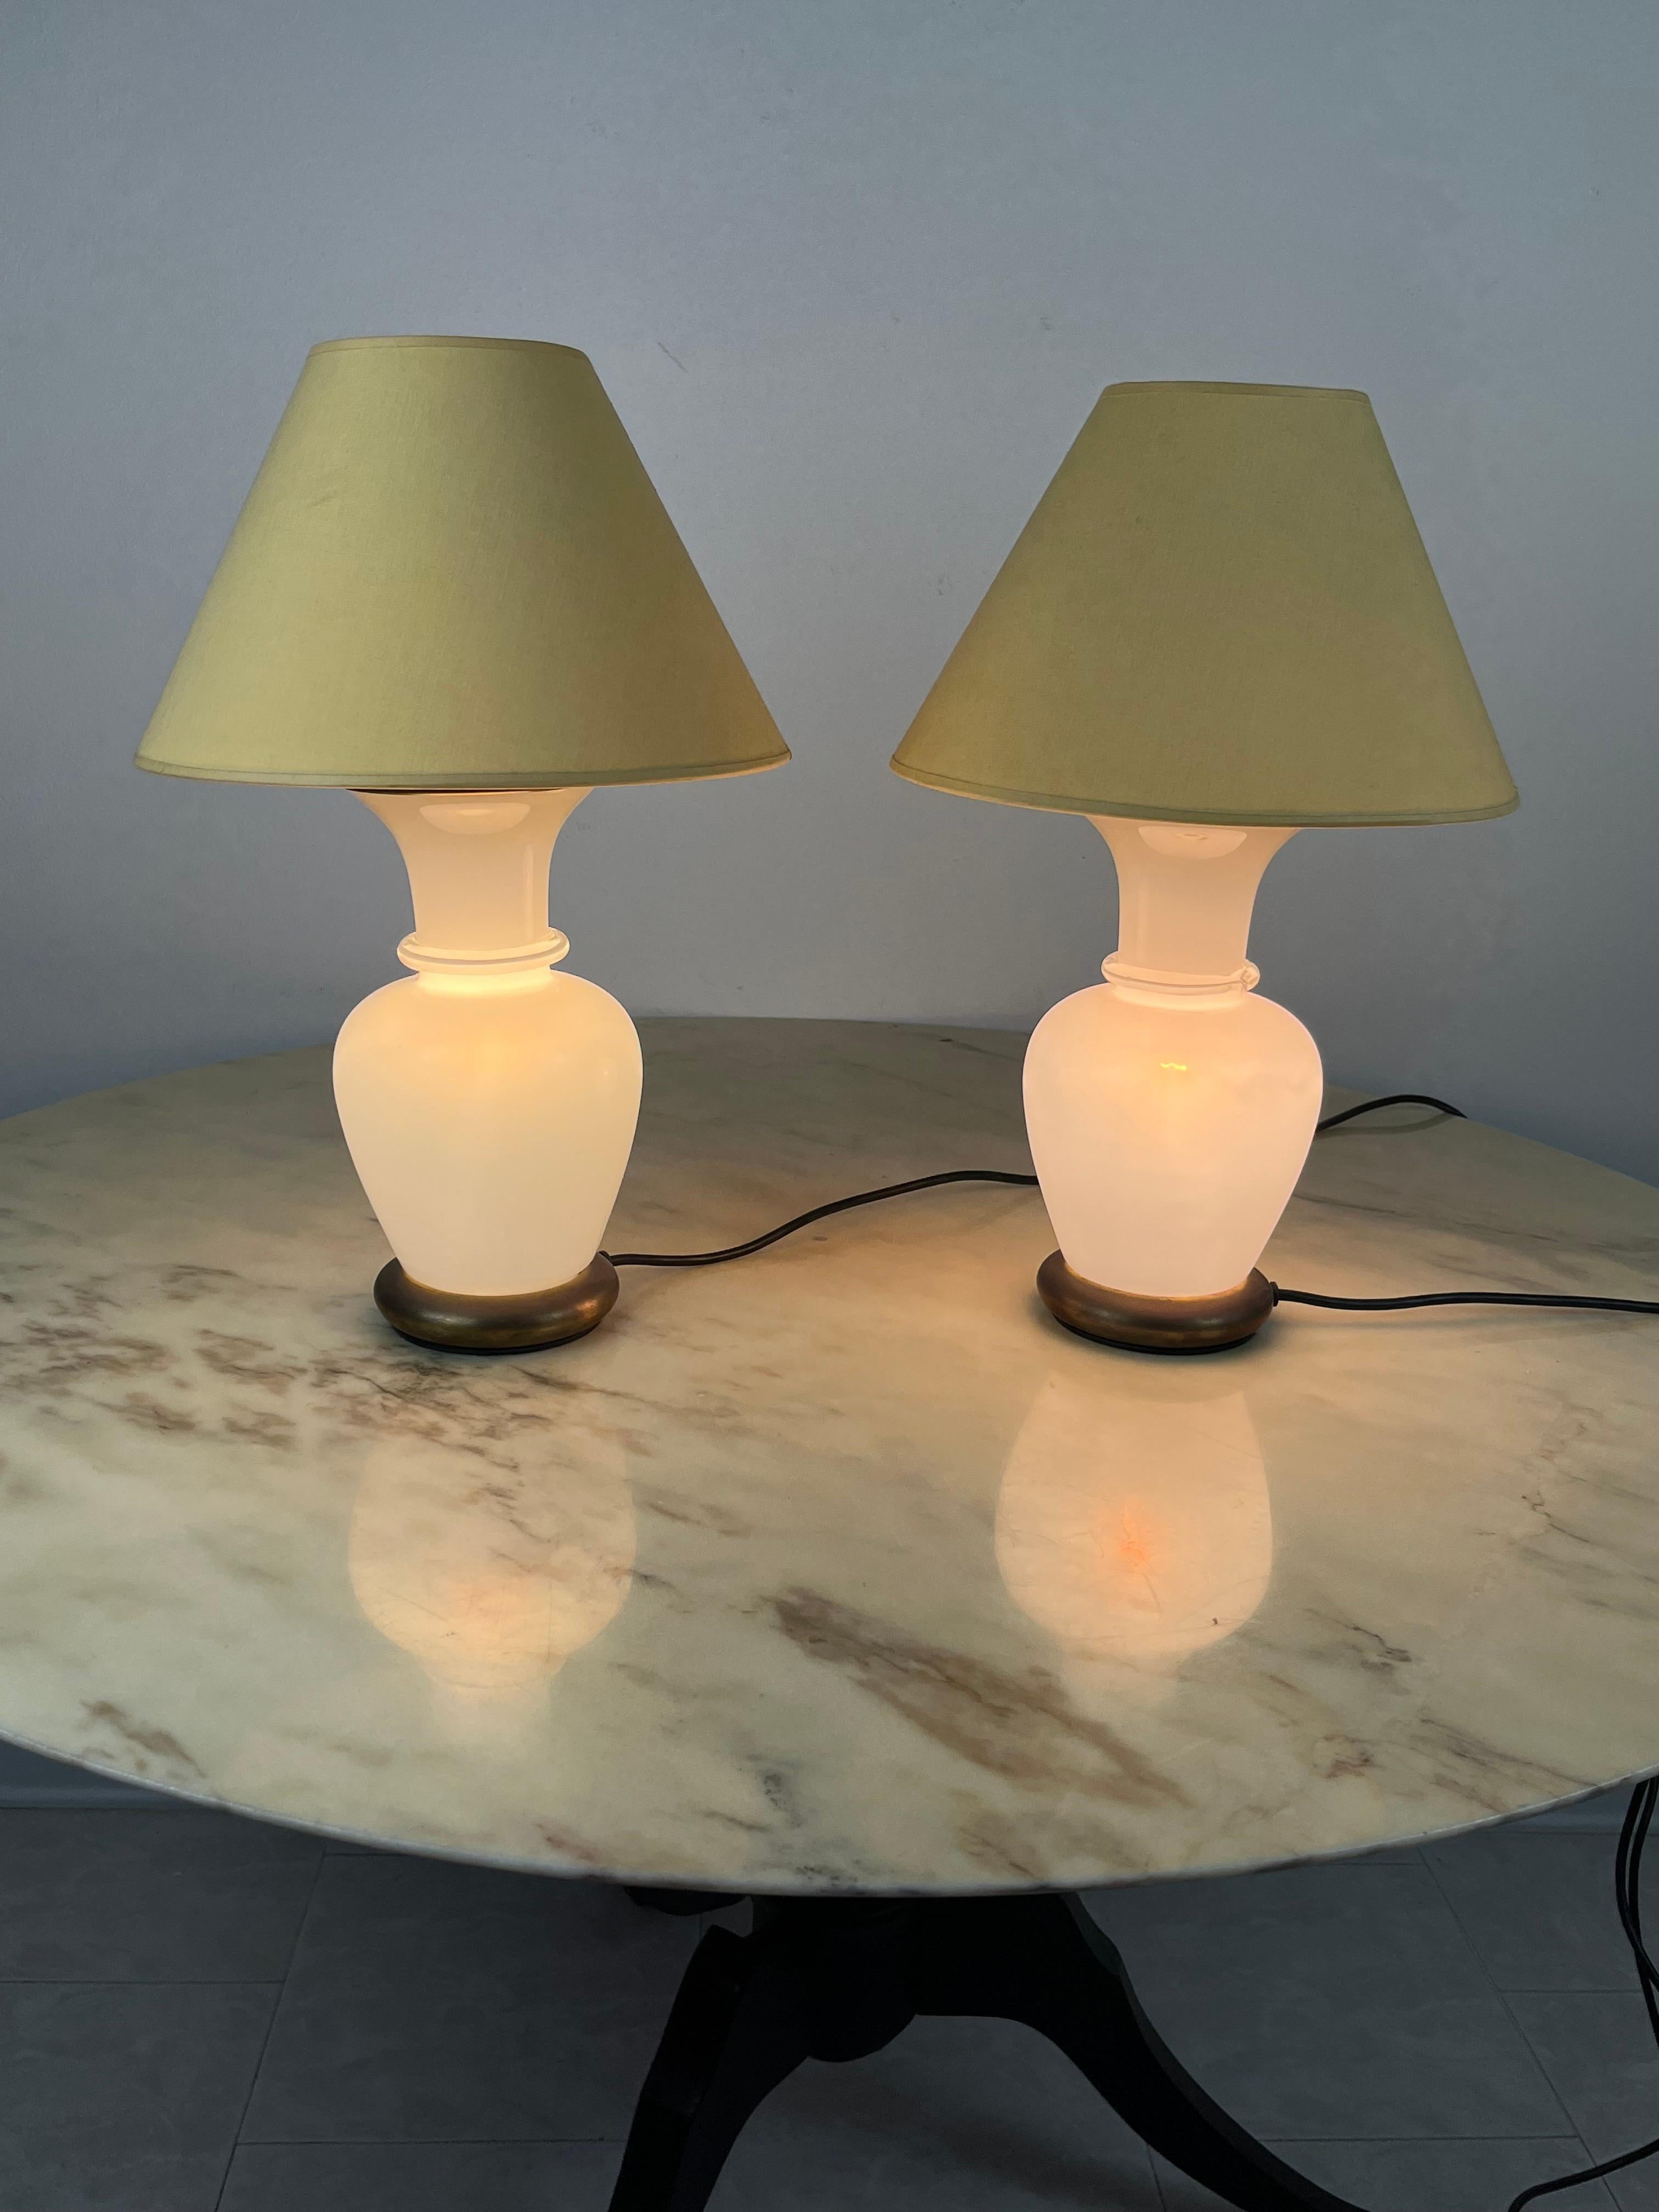 Other Set of 2 Murano Glass and Brass Table Lamps, F. Fabbian, Italy, 1970s For Sale